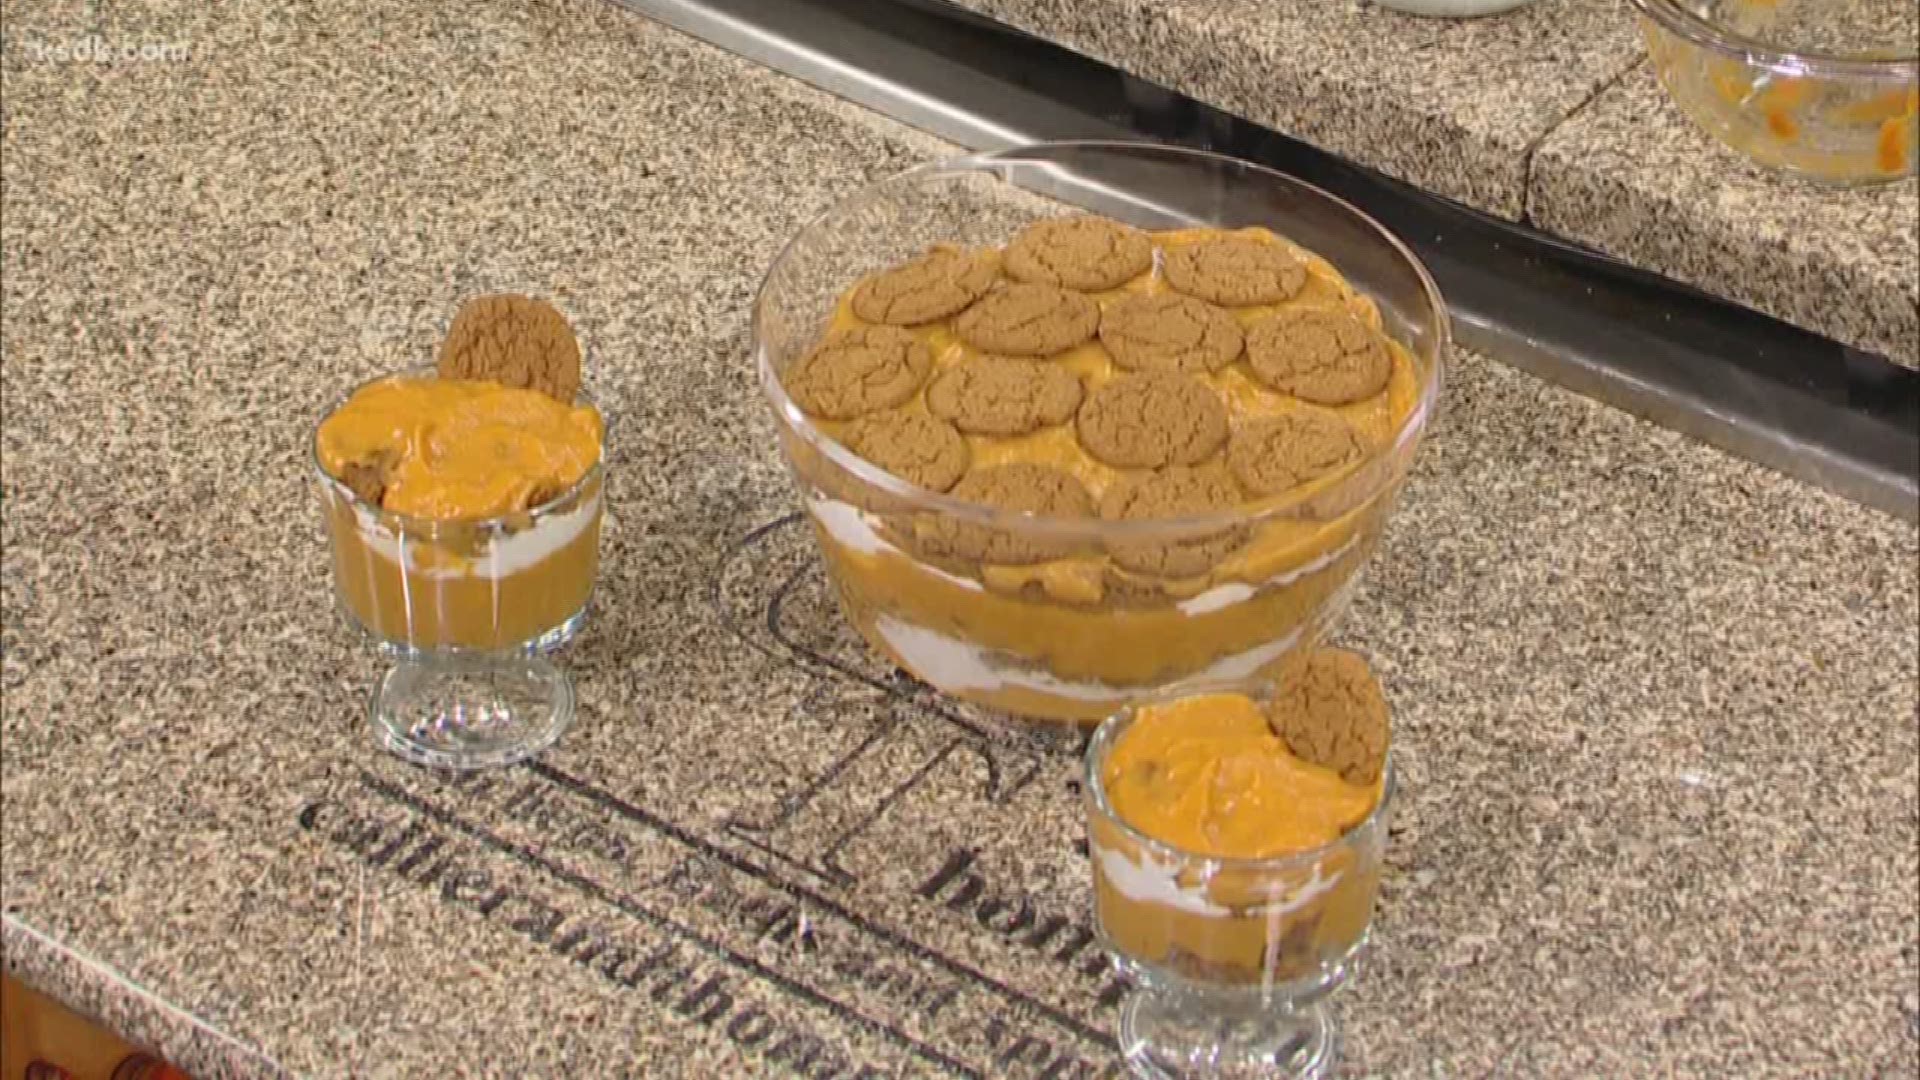 Amanda Marsh of the St. Louis District Dairy Council shared a recipe for a Pumpkin Trifle.